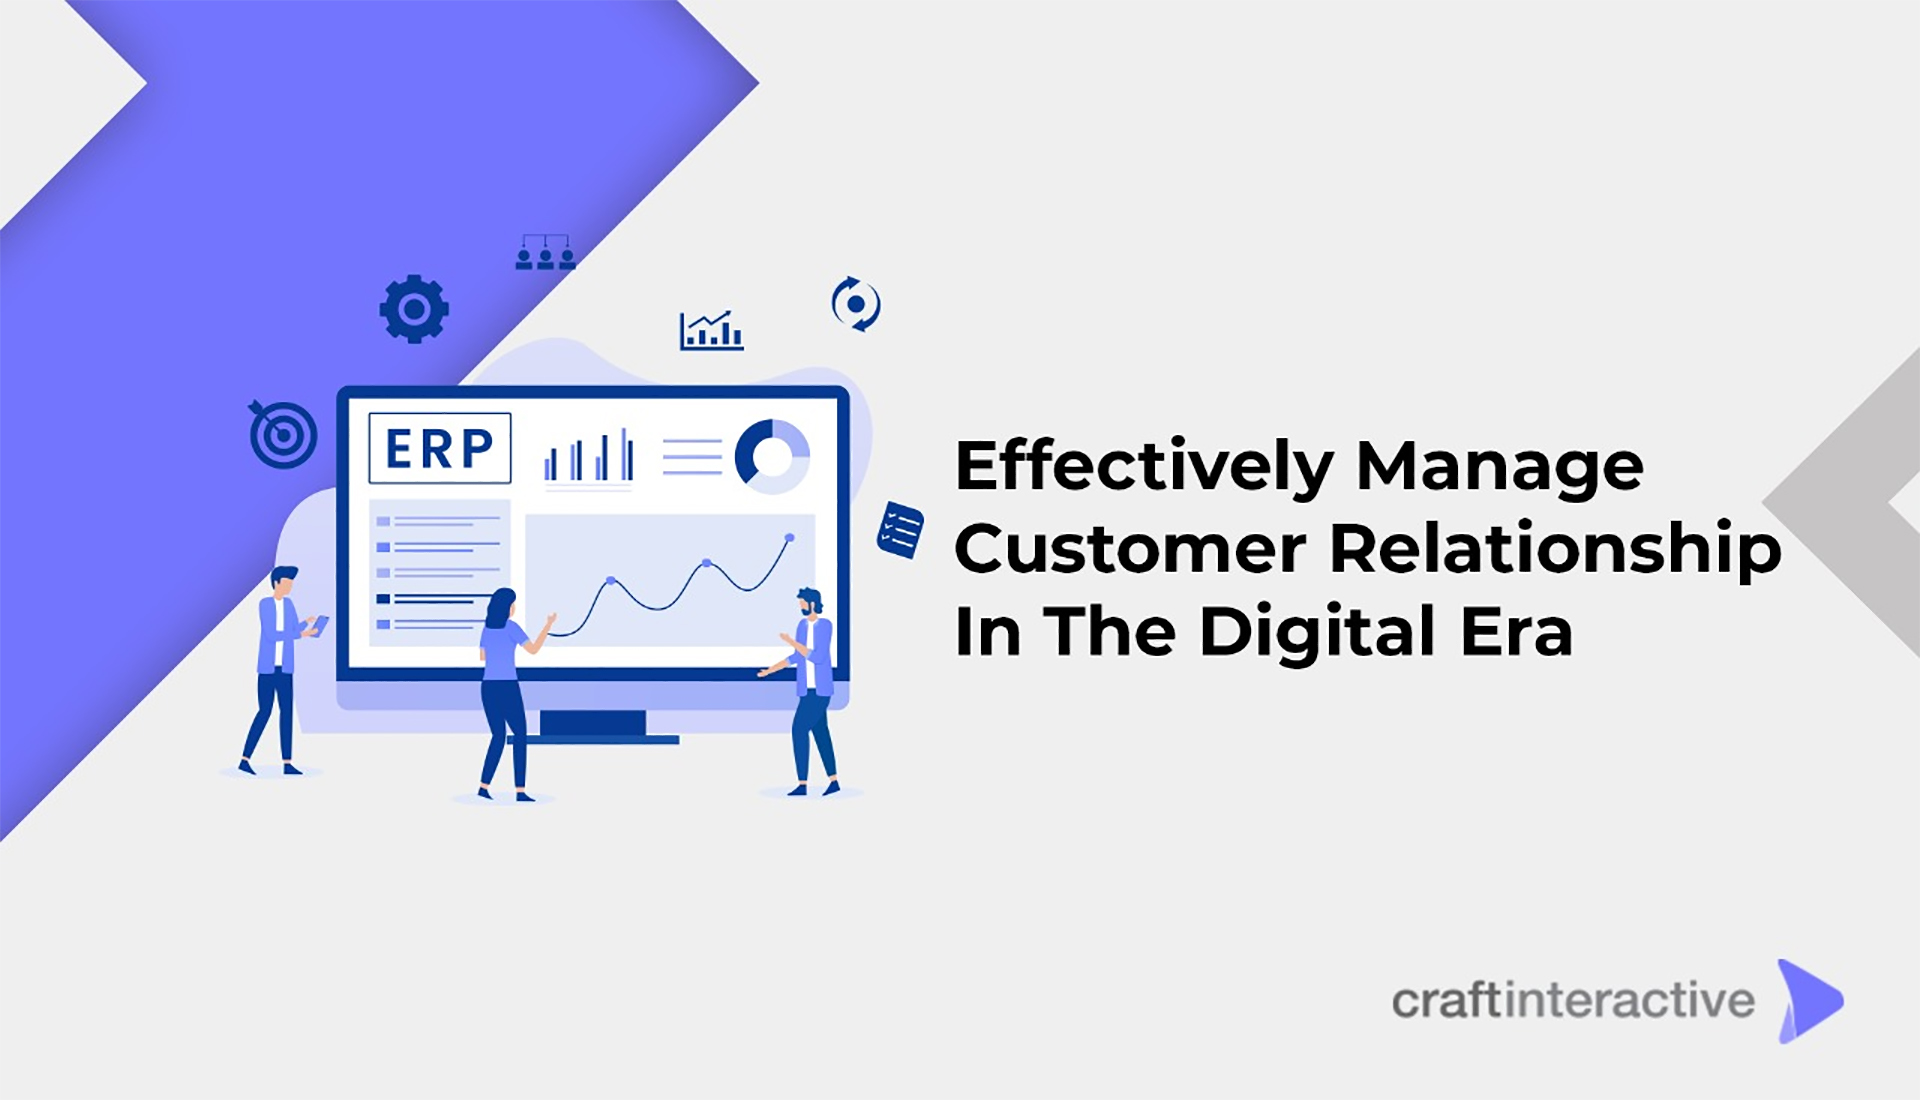 The Right Way to Effectively Manage Customer Relationship in the Digital Era 